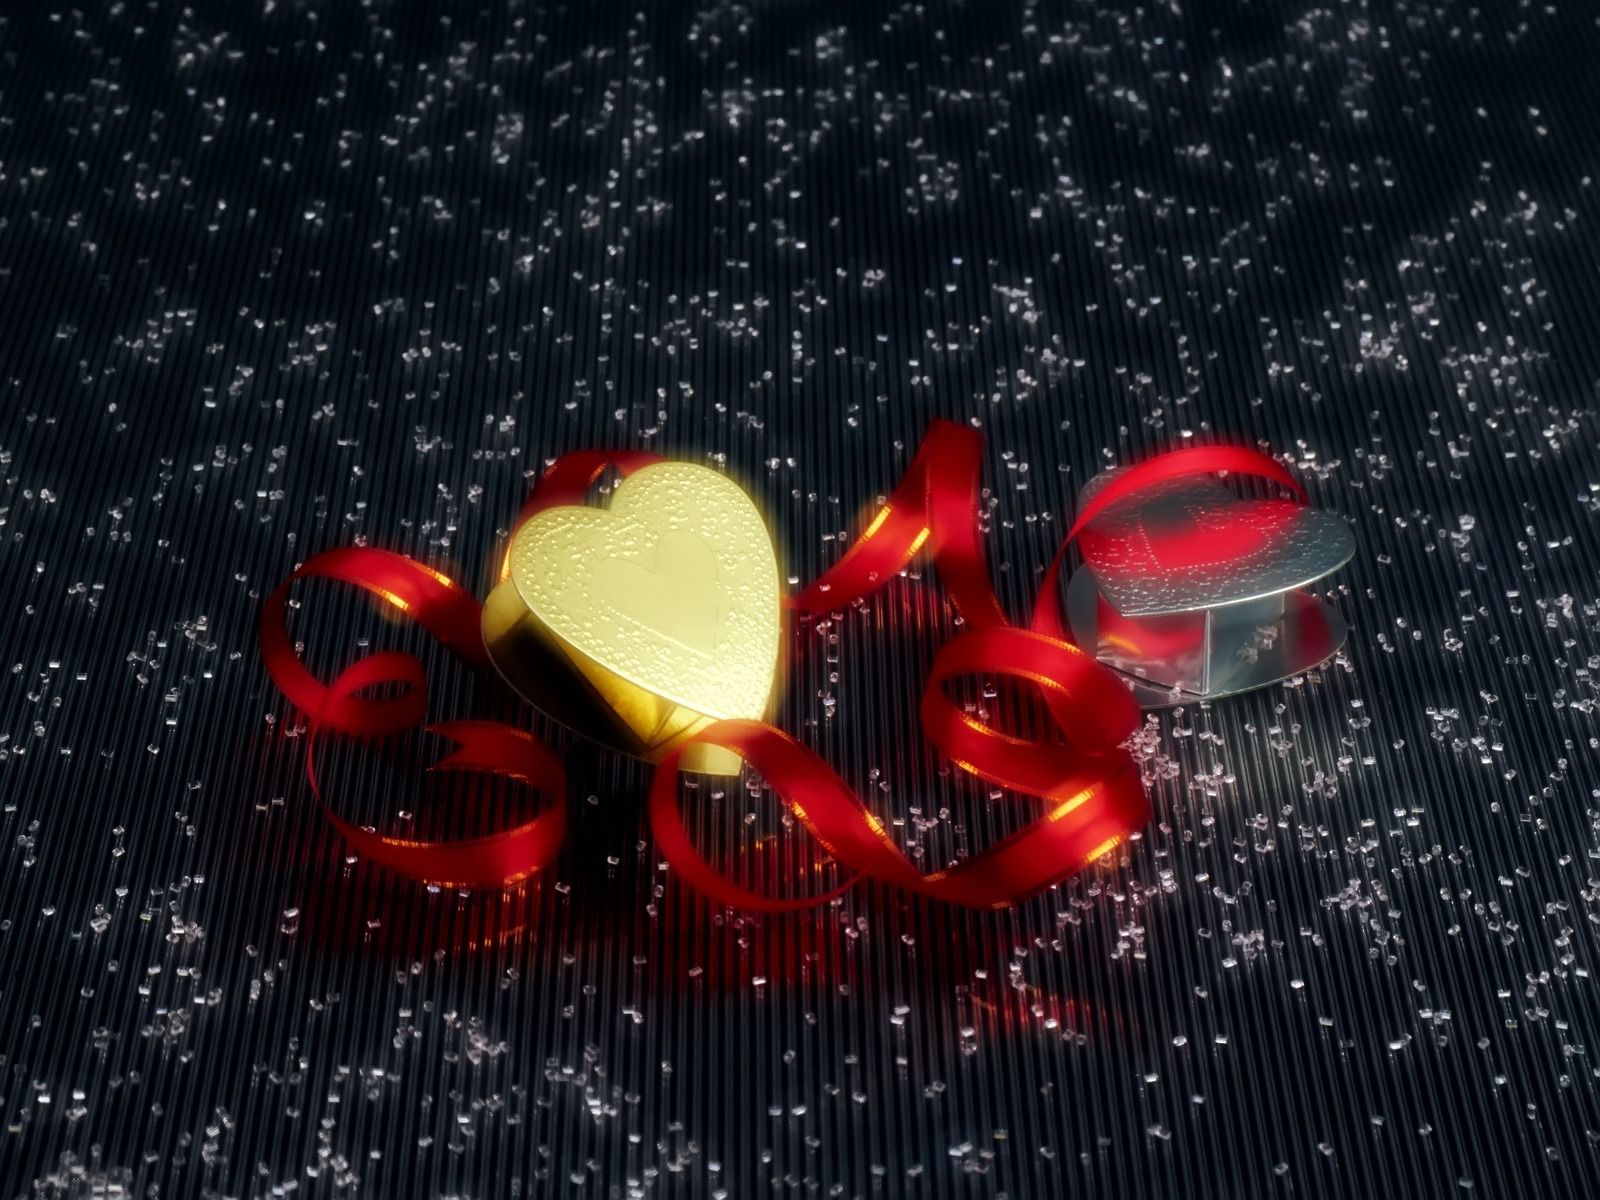 Christmas Hearts Wallpaper Christmas Holidays Wallpaper in jpg format for free download